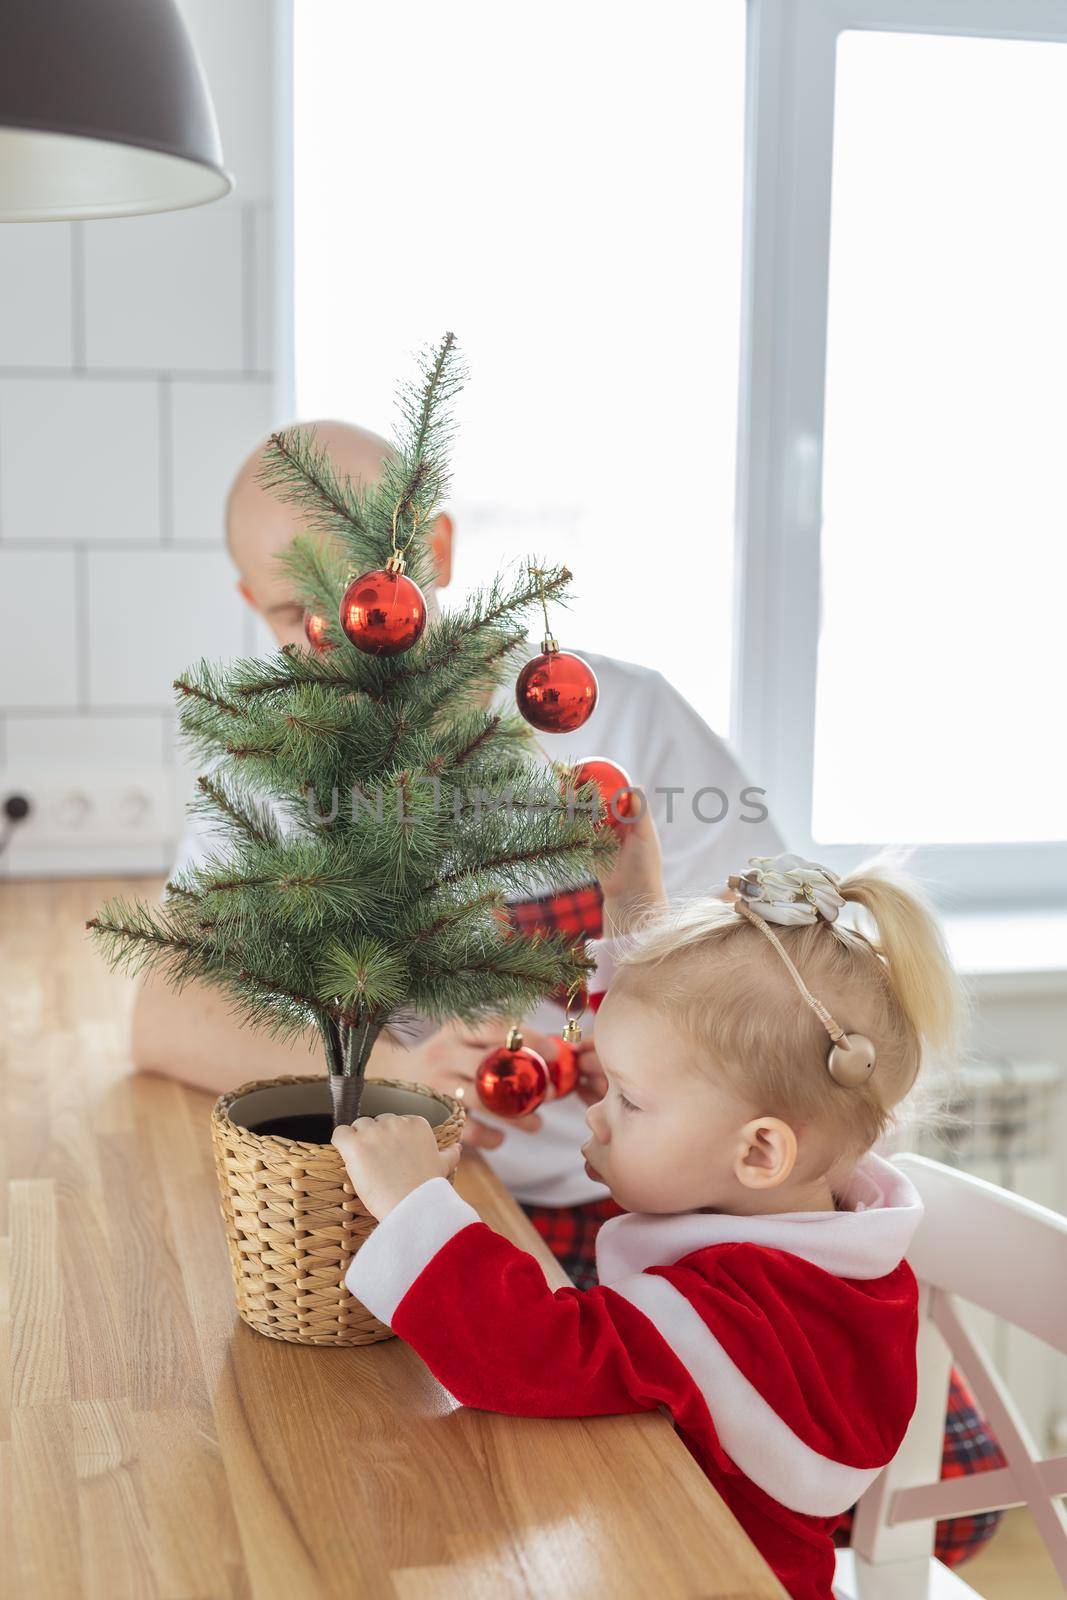 Child with cochlear implant hearing aid having fun with father and small christmas tree - diversity and deafness treatment and medical innovative technologies by Satura86